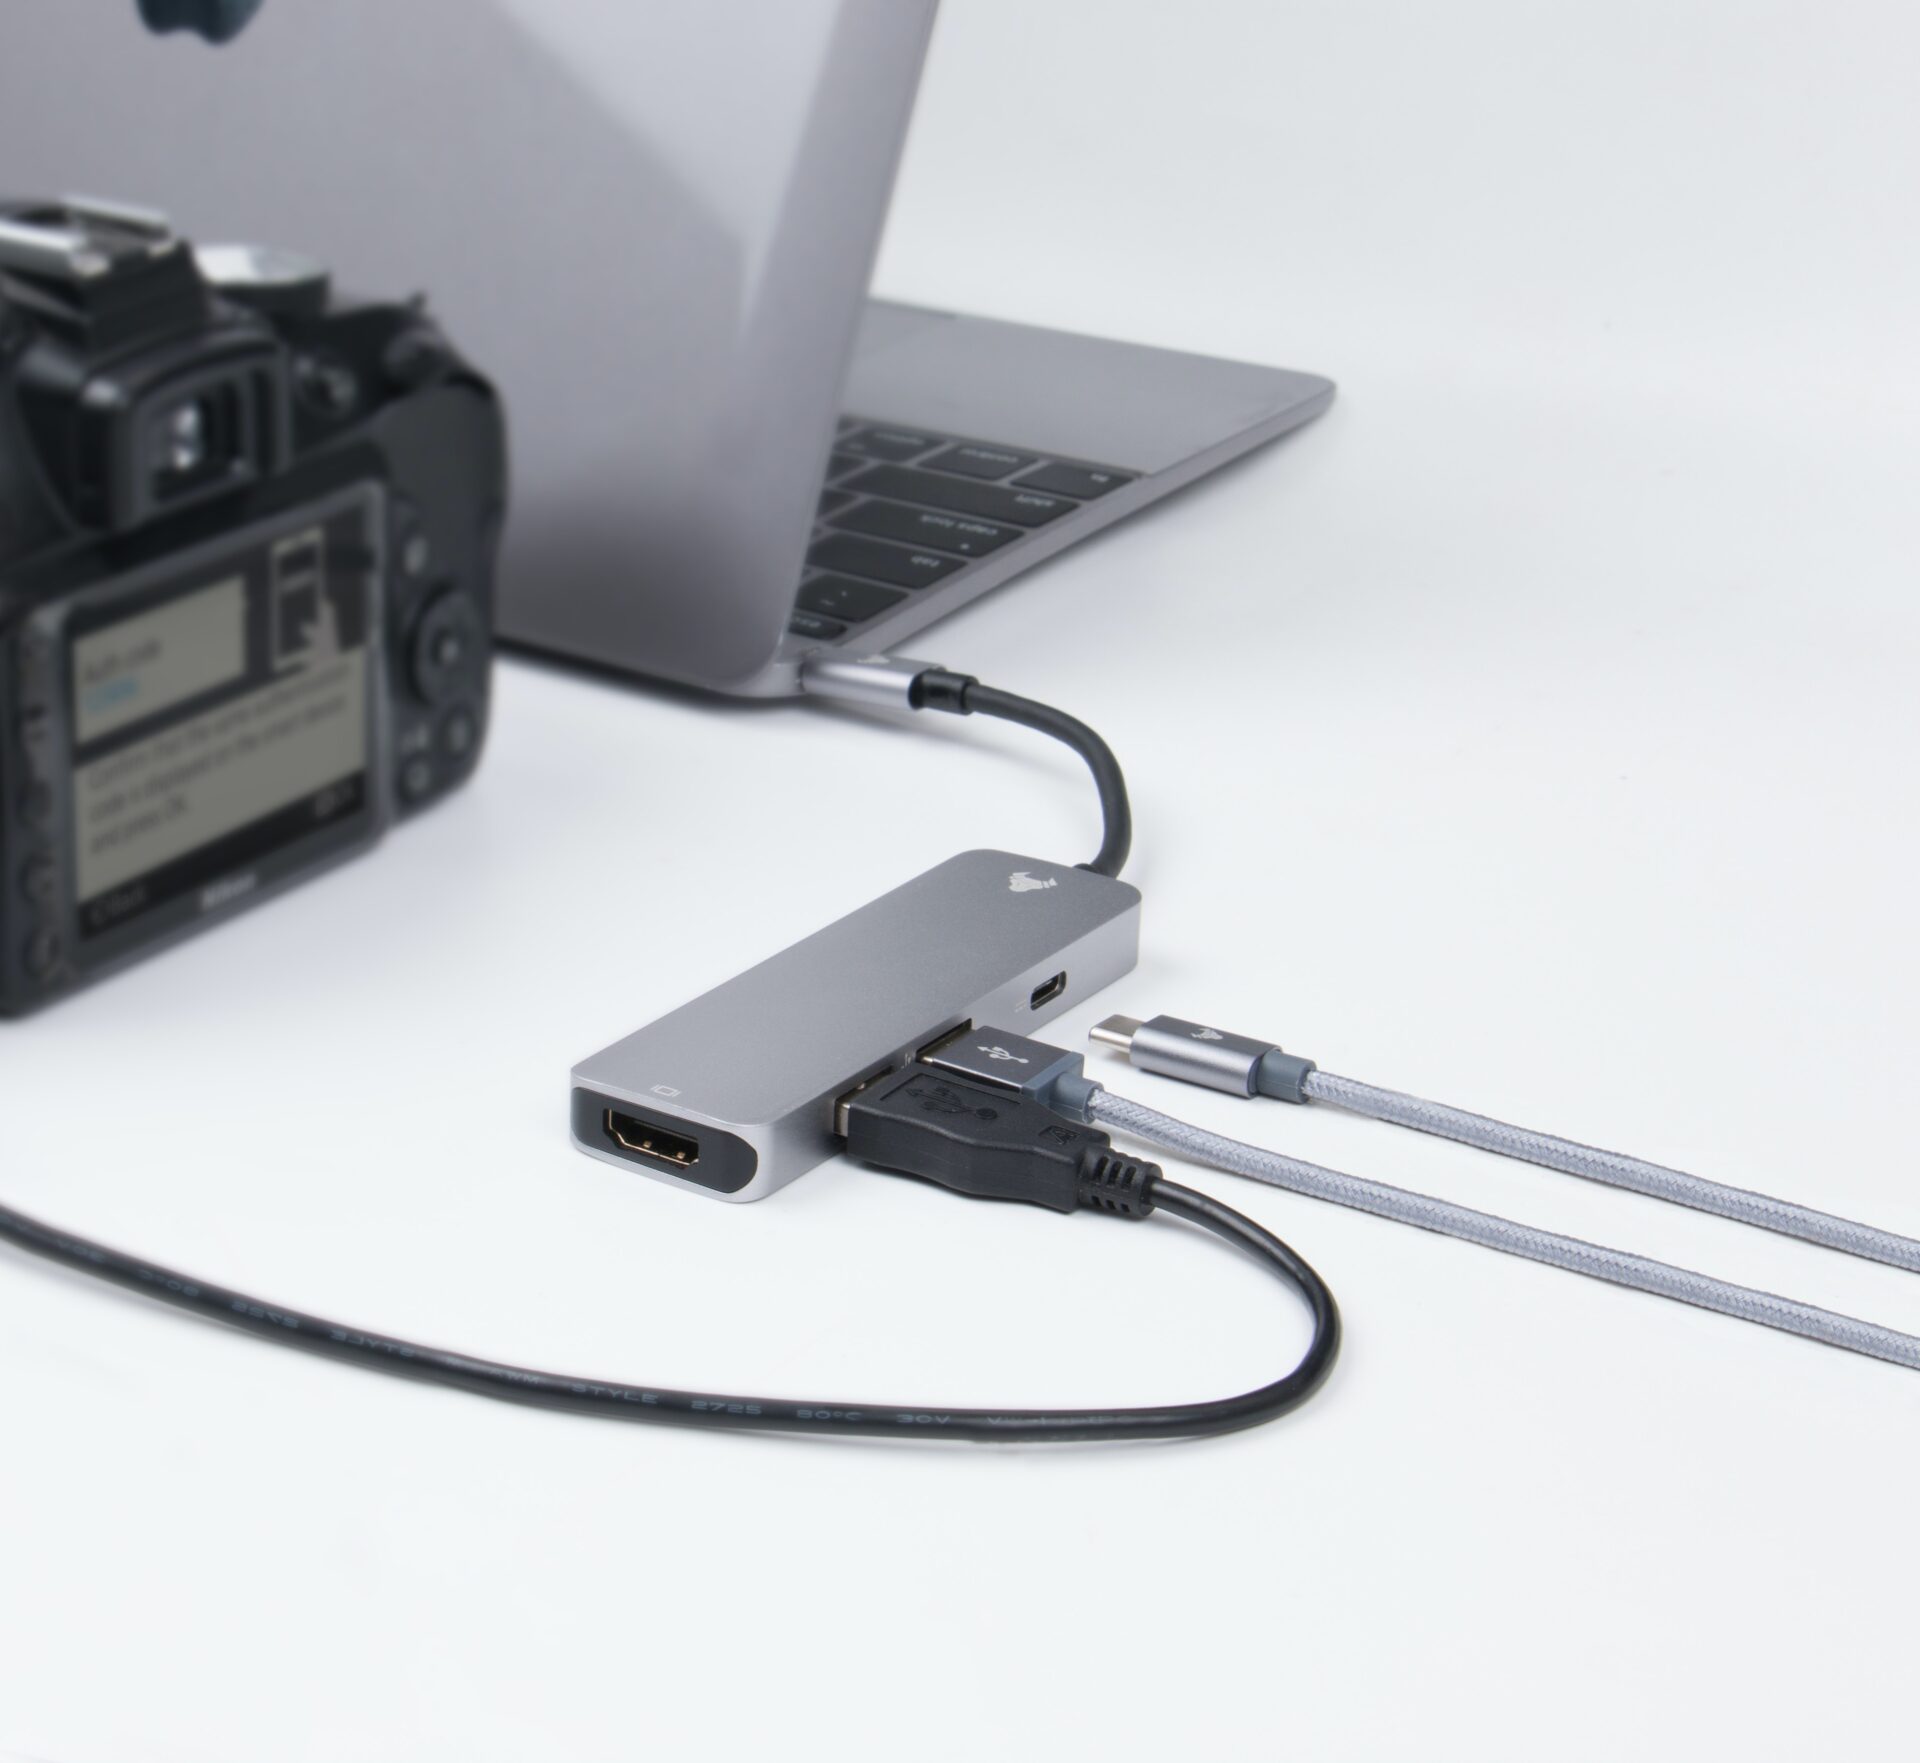 How-to-optimize-battery-life-on-your-laptop-charge